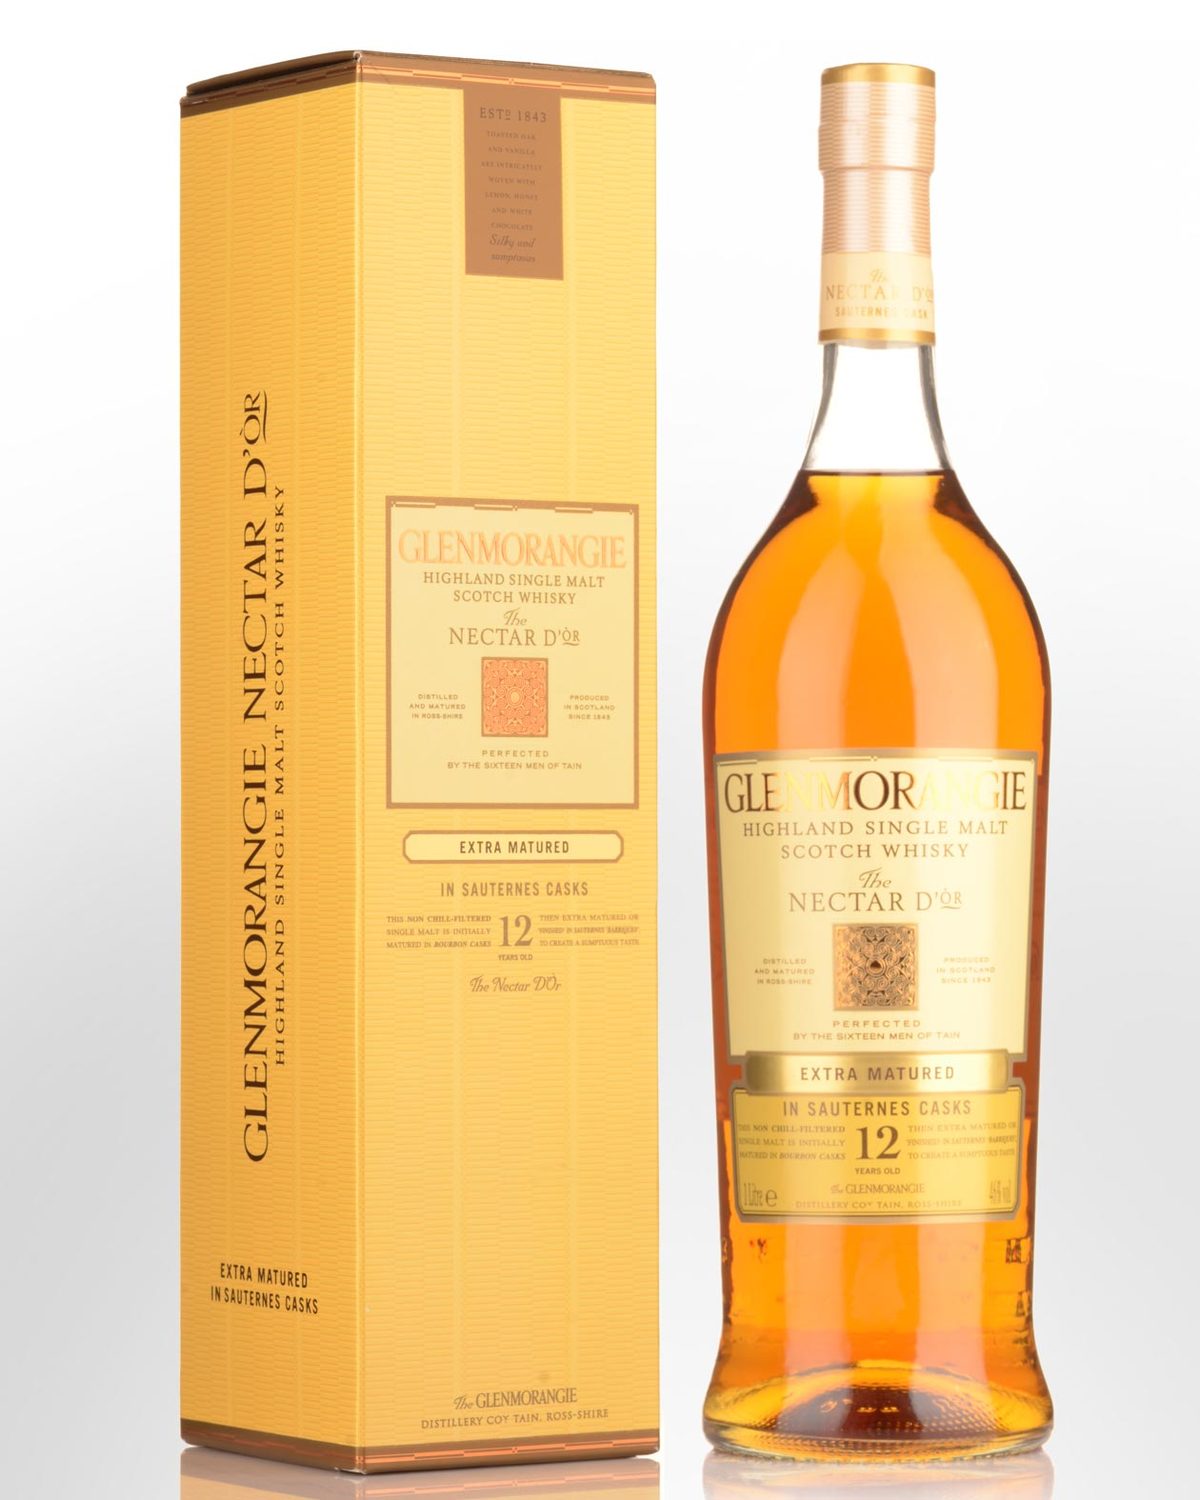 Glenmorangie Nectar d'Or 12 Year Old Single Malt Scotch Whisky (1000ml) -  Old packaging